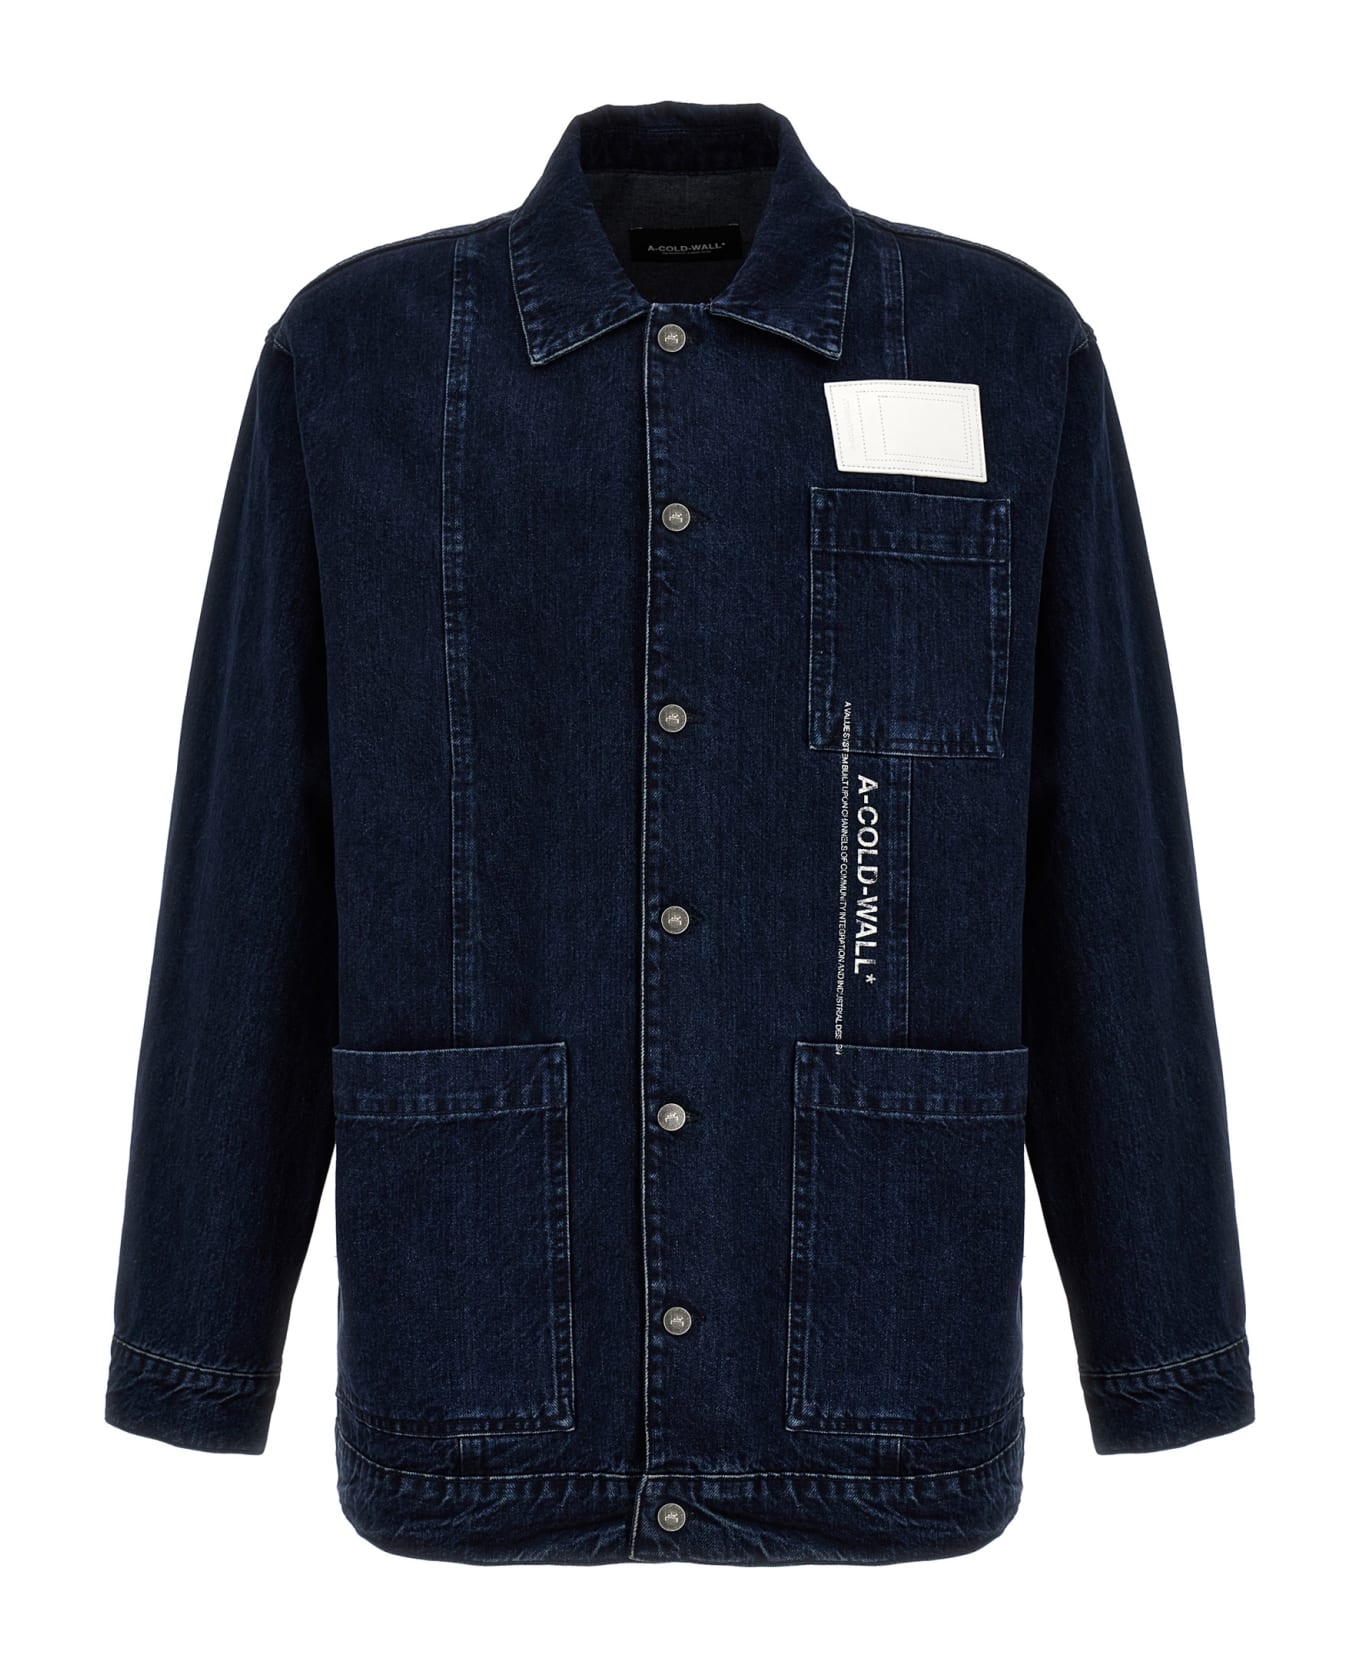 A-COLD-WALL 'discourse Chore' Jacket - Blue ジャケット